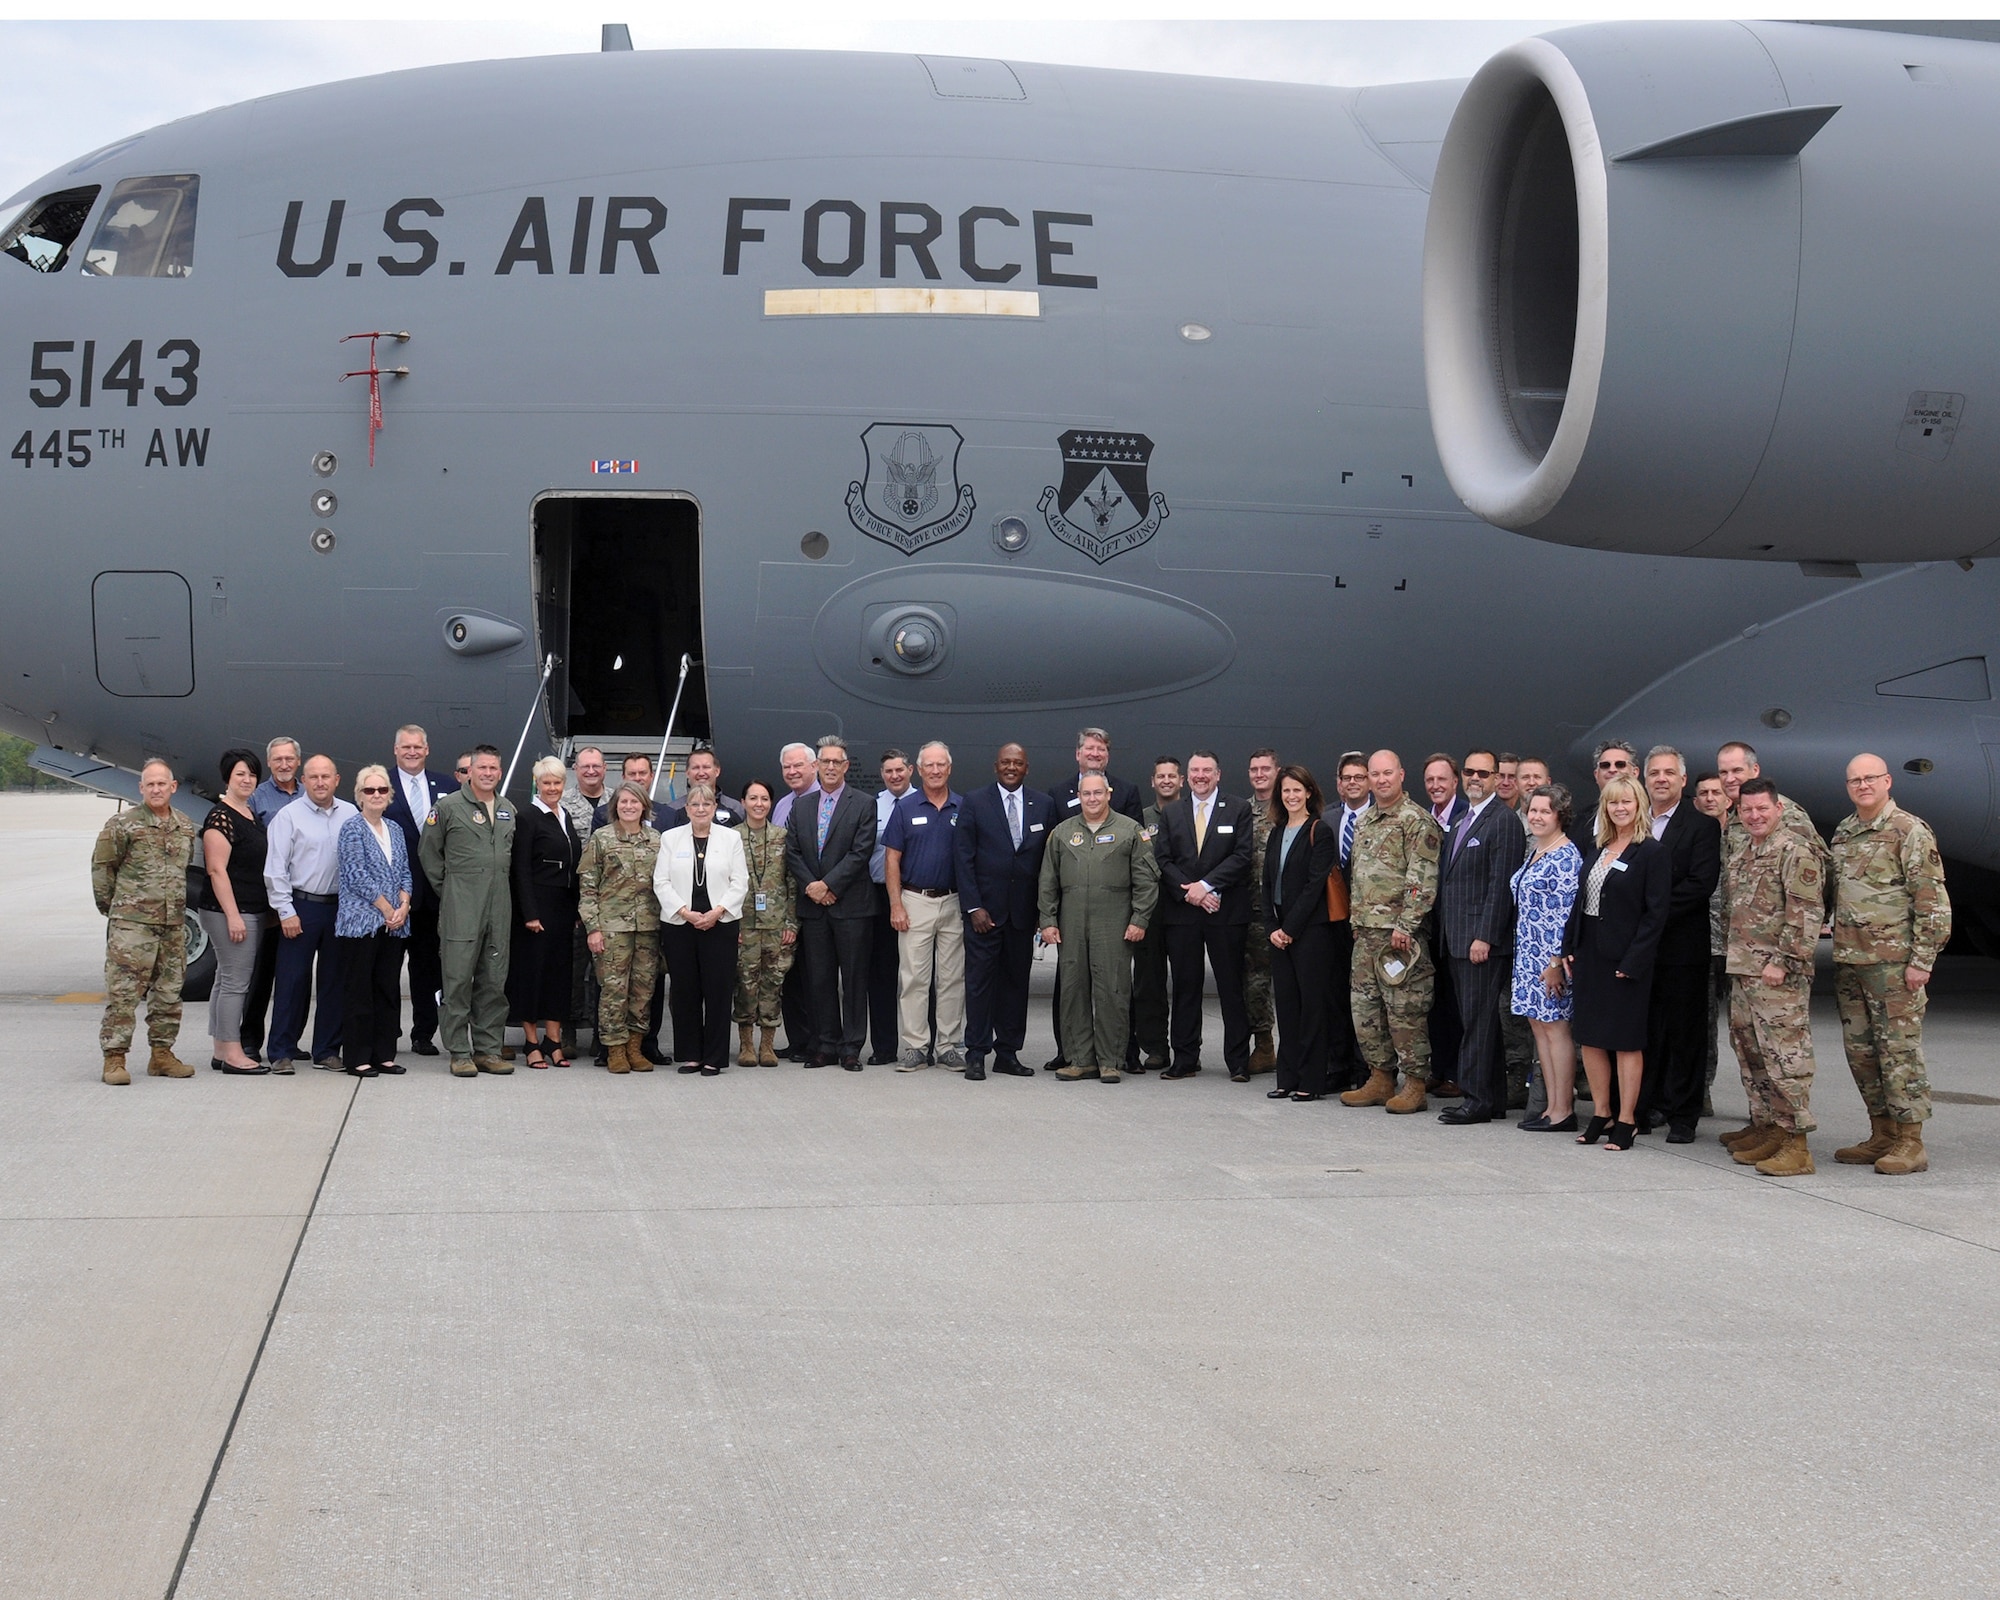 Commanders from 445th Airlift Wing and 655th Intelligence, Surveillance and Reconnaissance Wing pose for a group for with their honorary commanders, Sept. 6, 2019. Eighteen members from the surrounding communities were officially designated as honorary commanders in an official ceremony.